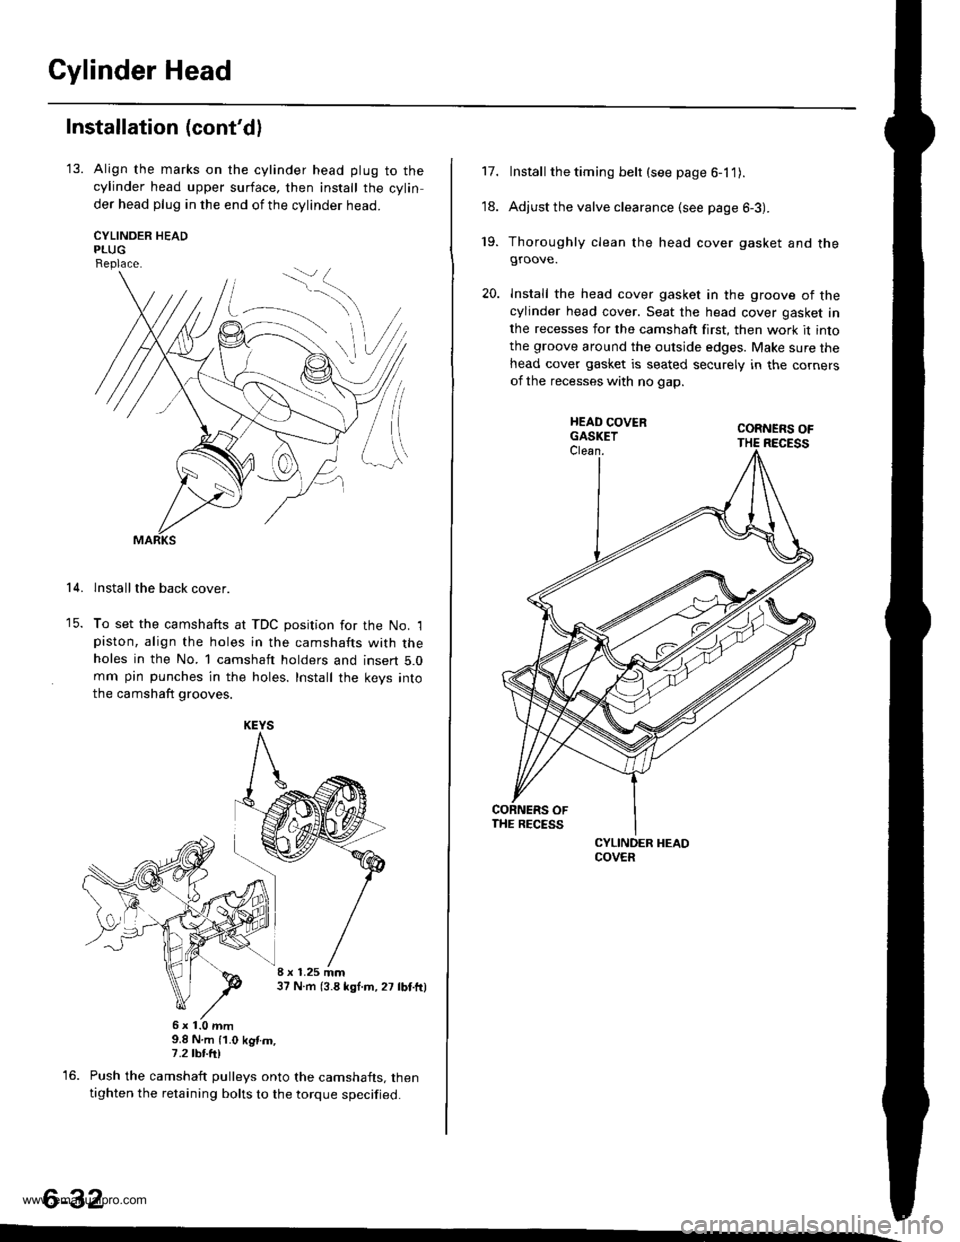 HONDA CR-V 1997 RD1-RD3 / 1.G User Guide 
Cylinder Head
Installation (contdl
13. Align the marks on the cylinder head plug to thecylinder head upper surface, then install the cylin
der head plug in the end of the cylinder head.
CYLINOER HE